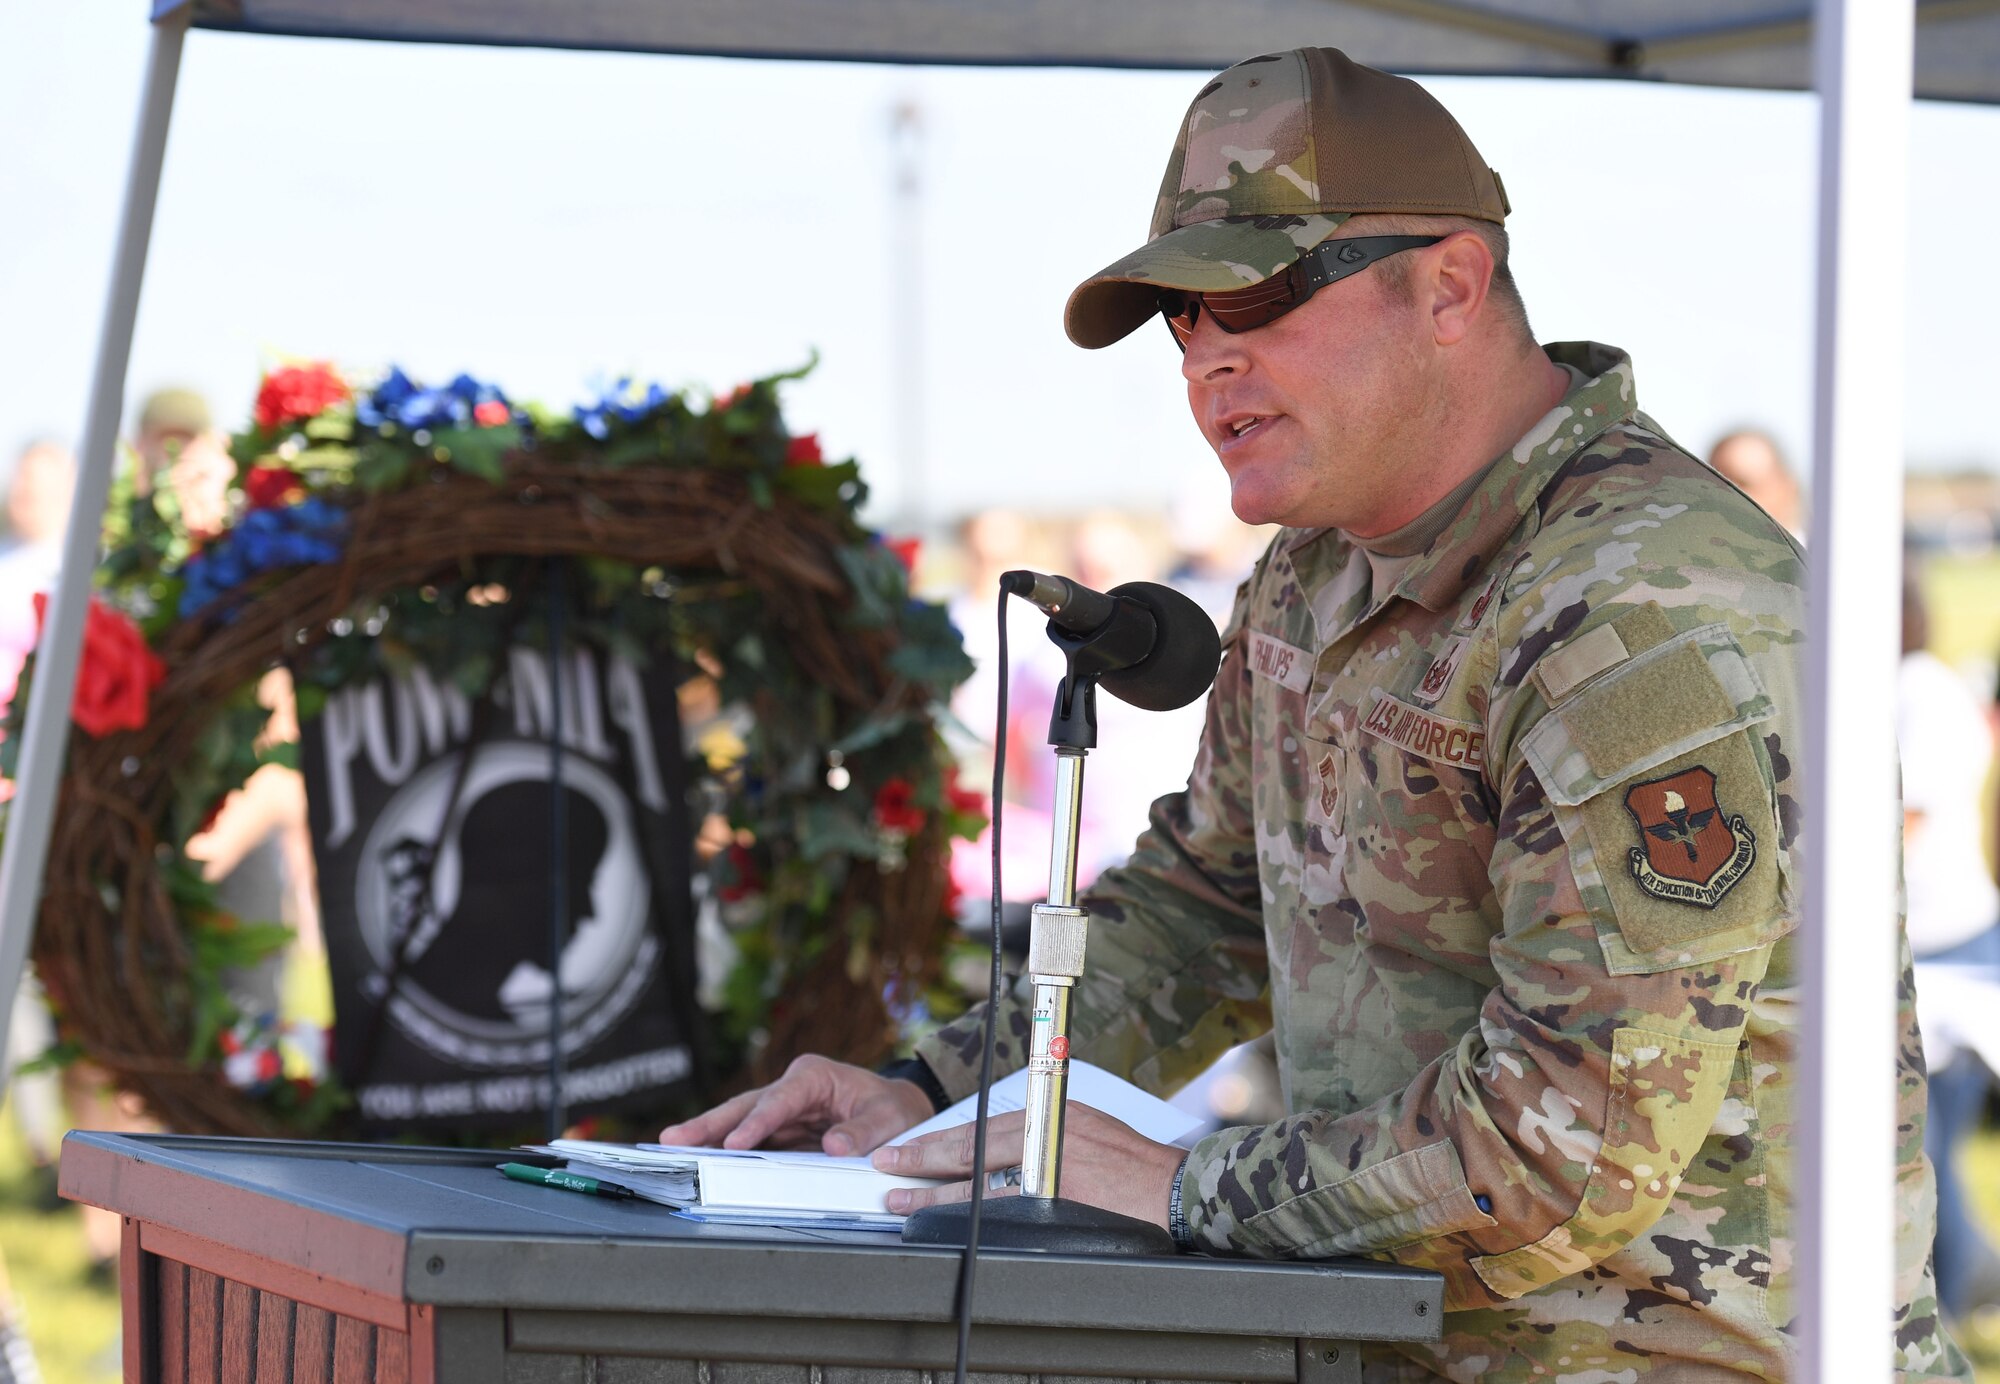 U.S. Air Force Chief Master Sgt. Jeremy Phillips, 81st Training Group senior enlisted leader, delivers remarks during the POW/MIA run and vigil at the triangle track on Keesler Air Force Base, Mississippi, Sept. 16, 2022. The event, hosted by the Air Force Sergeants Association Chapter 652, is held annually to raise awareness and pay tribute to all prisoners of war and the military members still missing in action. (U.S. Air Force photo by Kemberly Groue)